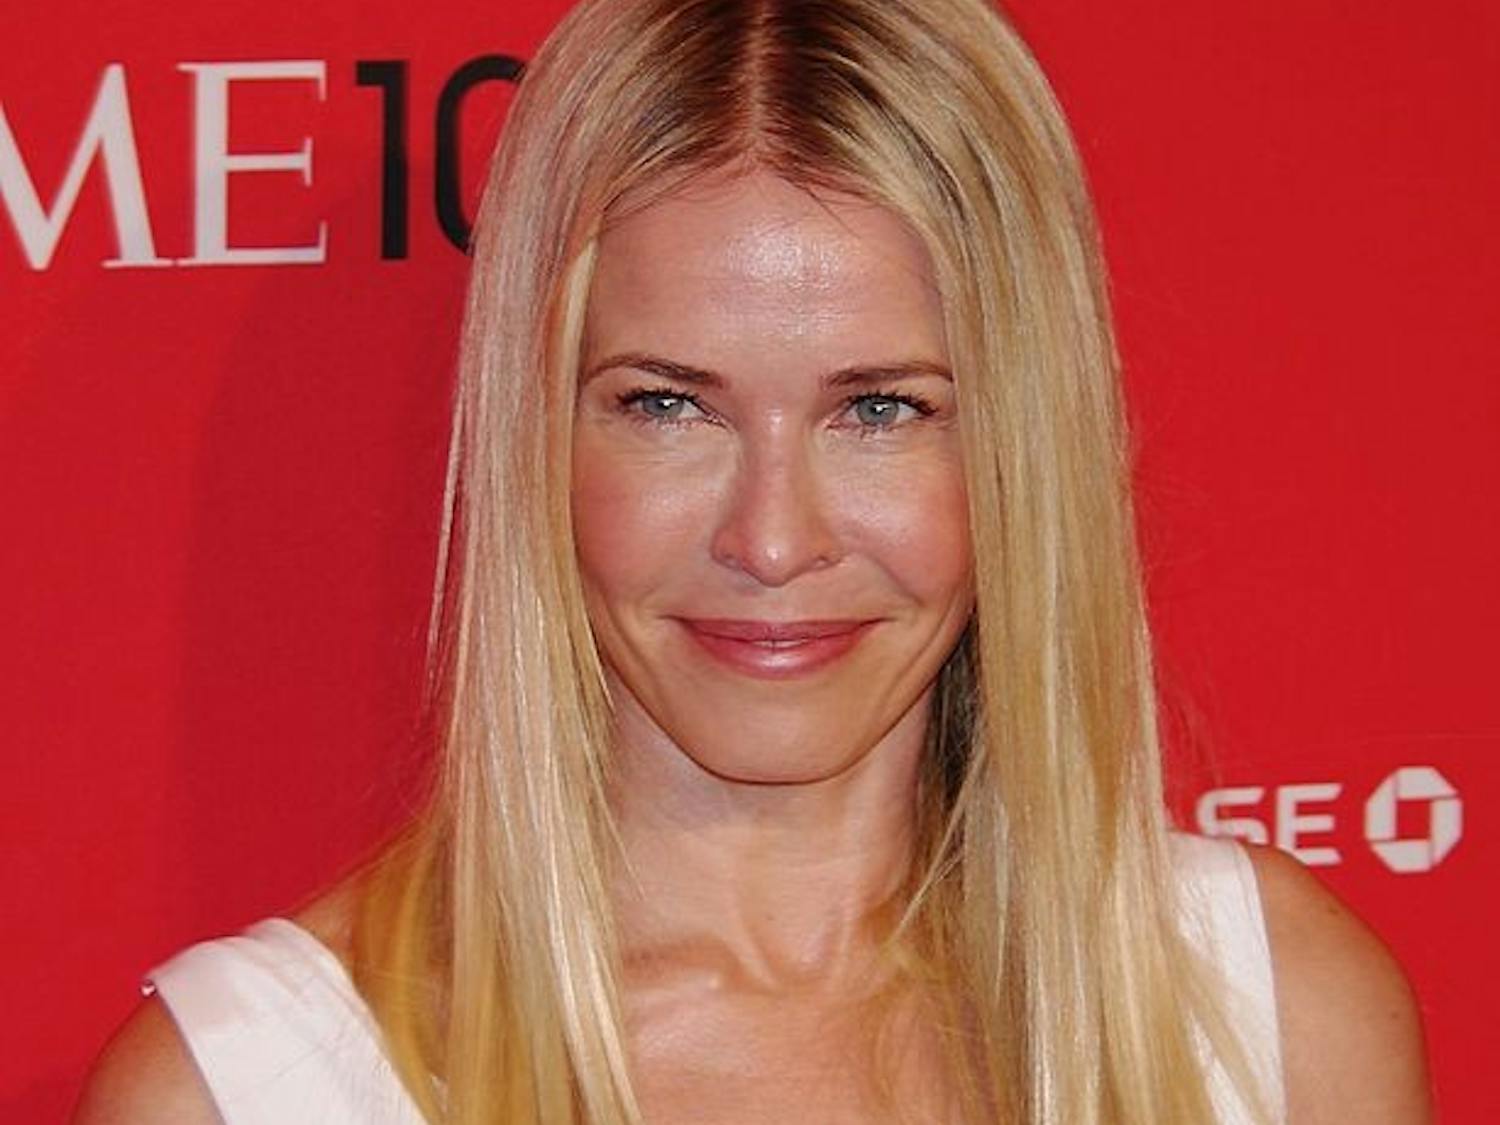 Chelsea Handler makes many&nbsp;poignant points through comedy in a new Netflix original series.&nbsp;